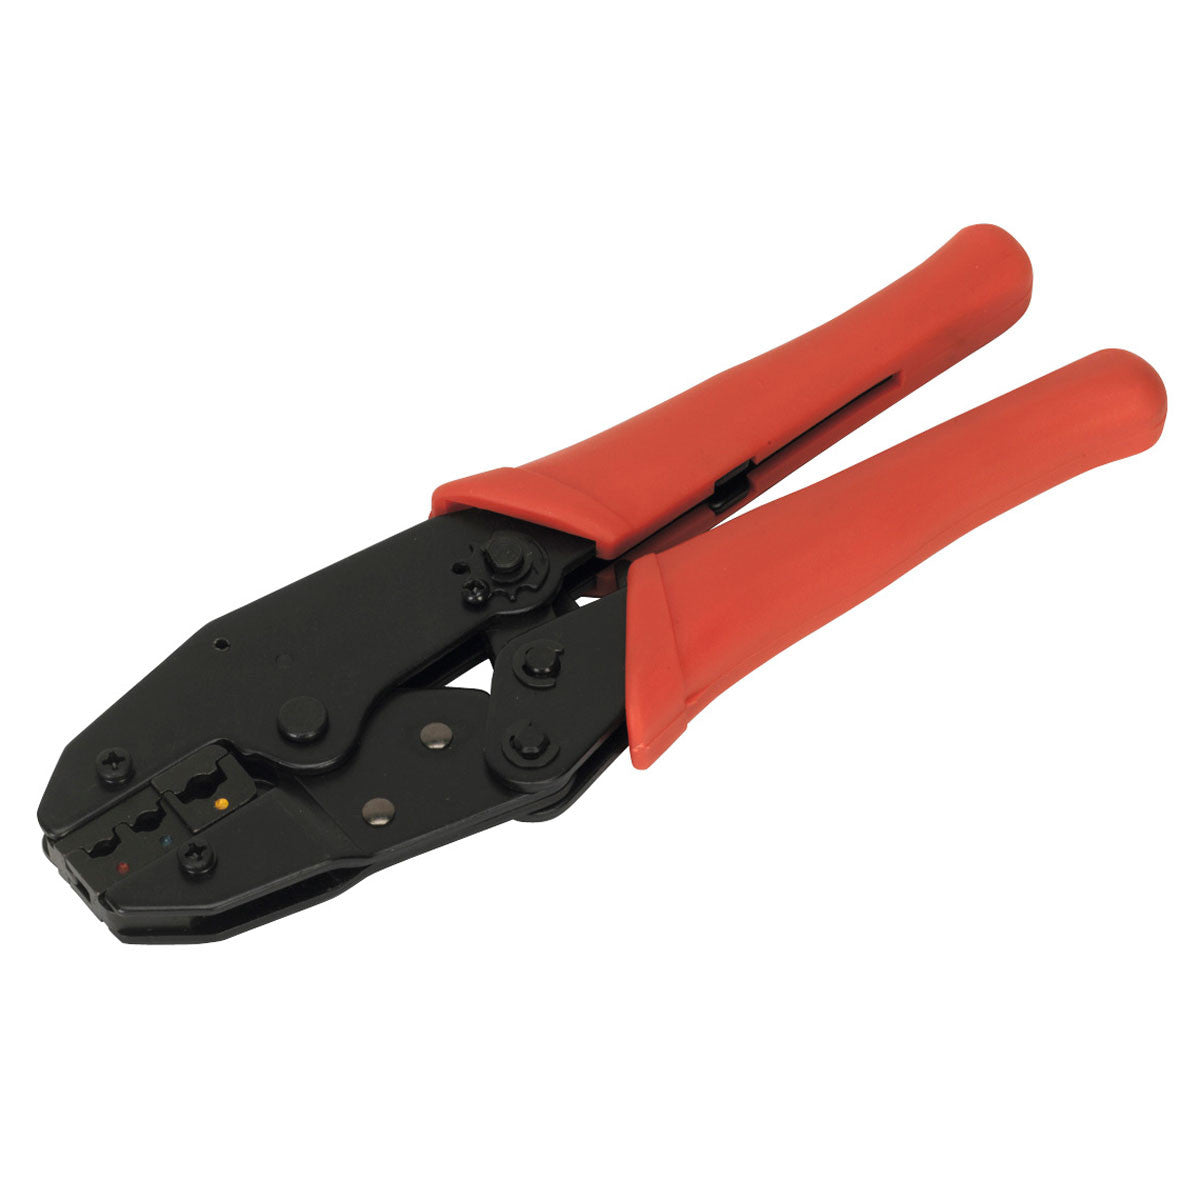 Ratchet Crimpers For Insulated Terminals - Heavy Duty *Most Popular* - spo-cs-disabled - spo-default - spo-enabled - sp